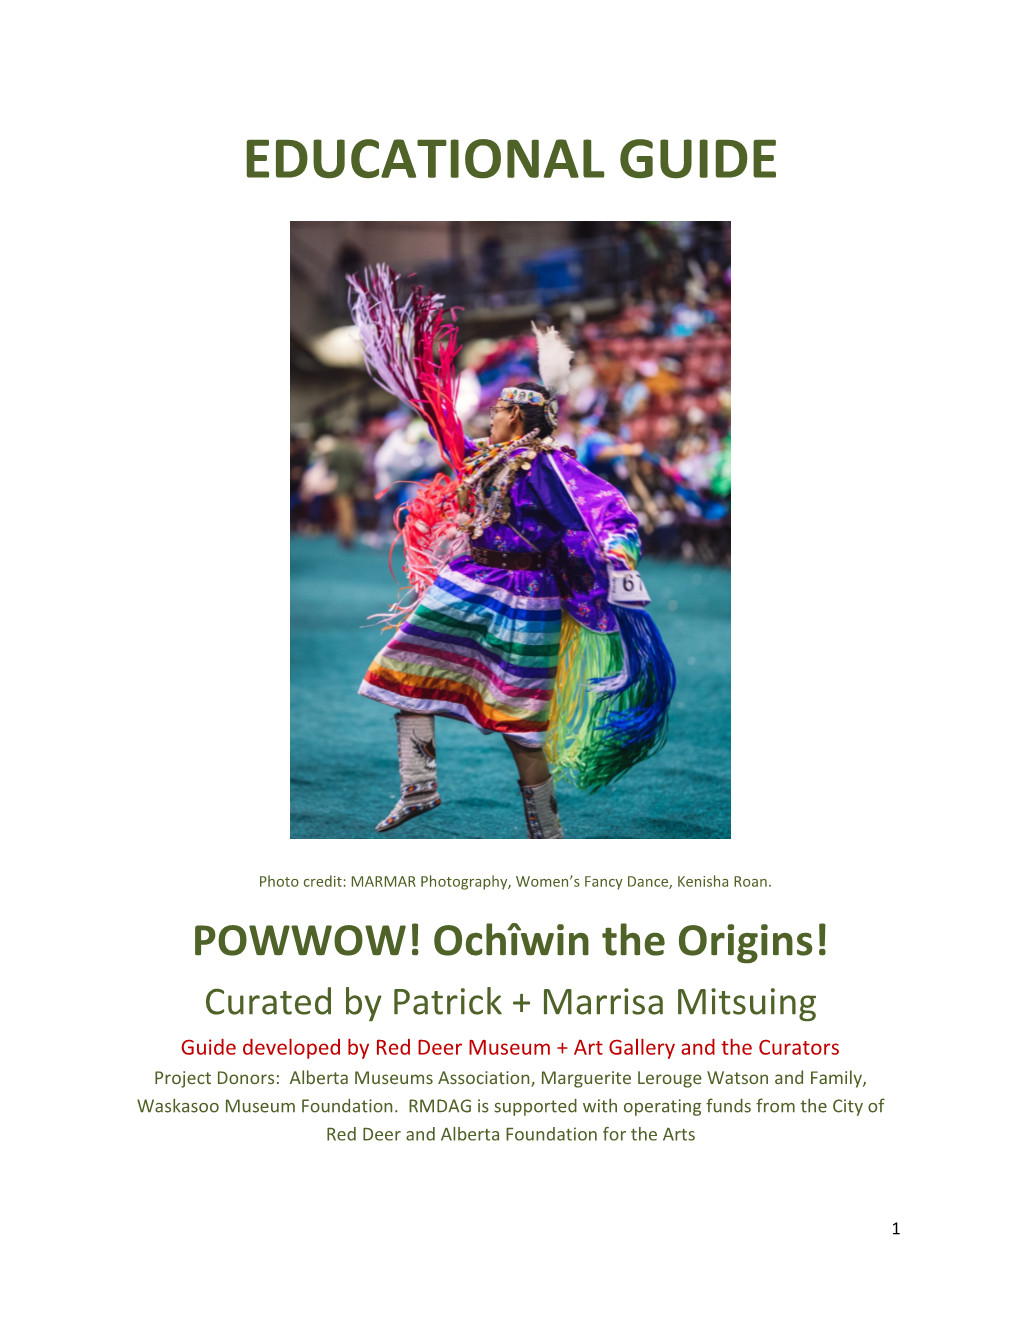 Ohcîwin the Origins Full Educational Guide